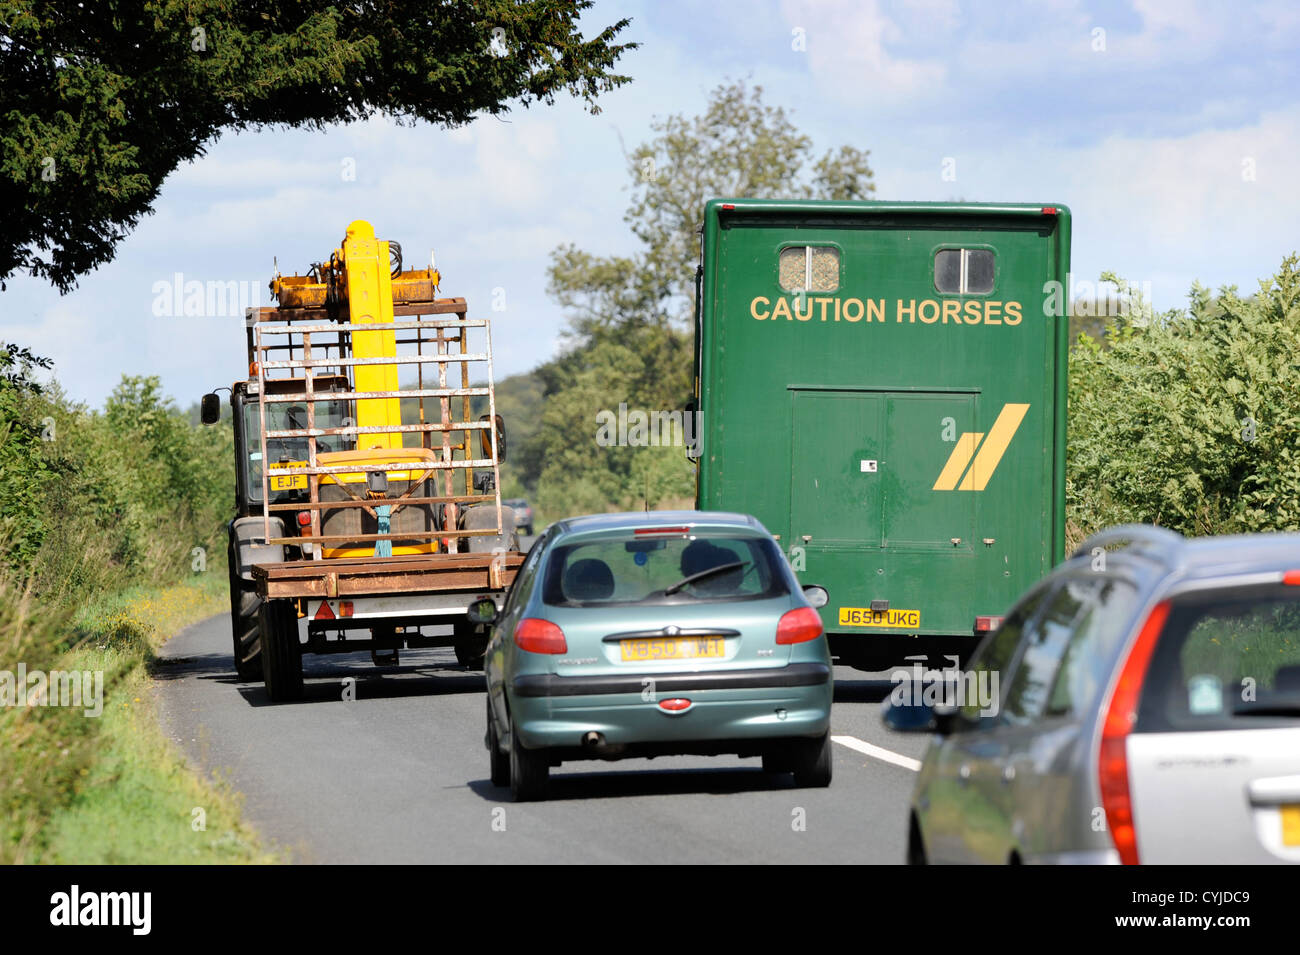 A horse box overtakes an agricultural vehicle on a road in Gloucestershire UK Stock Photo